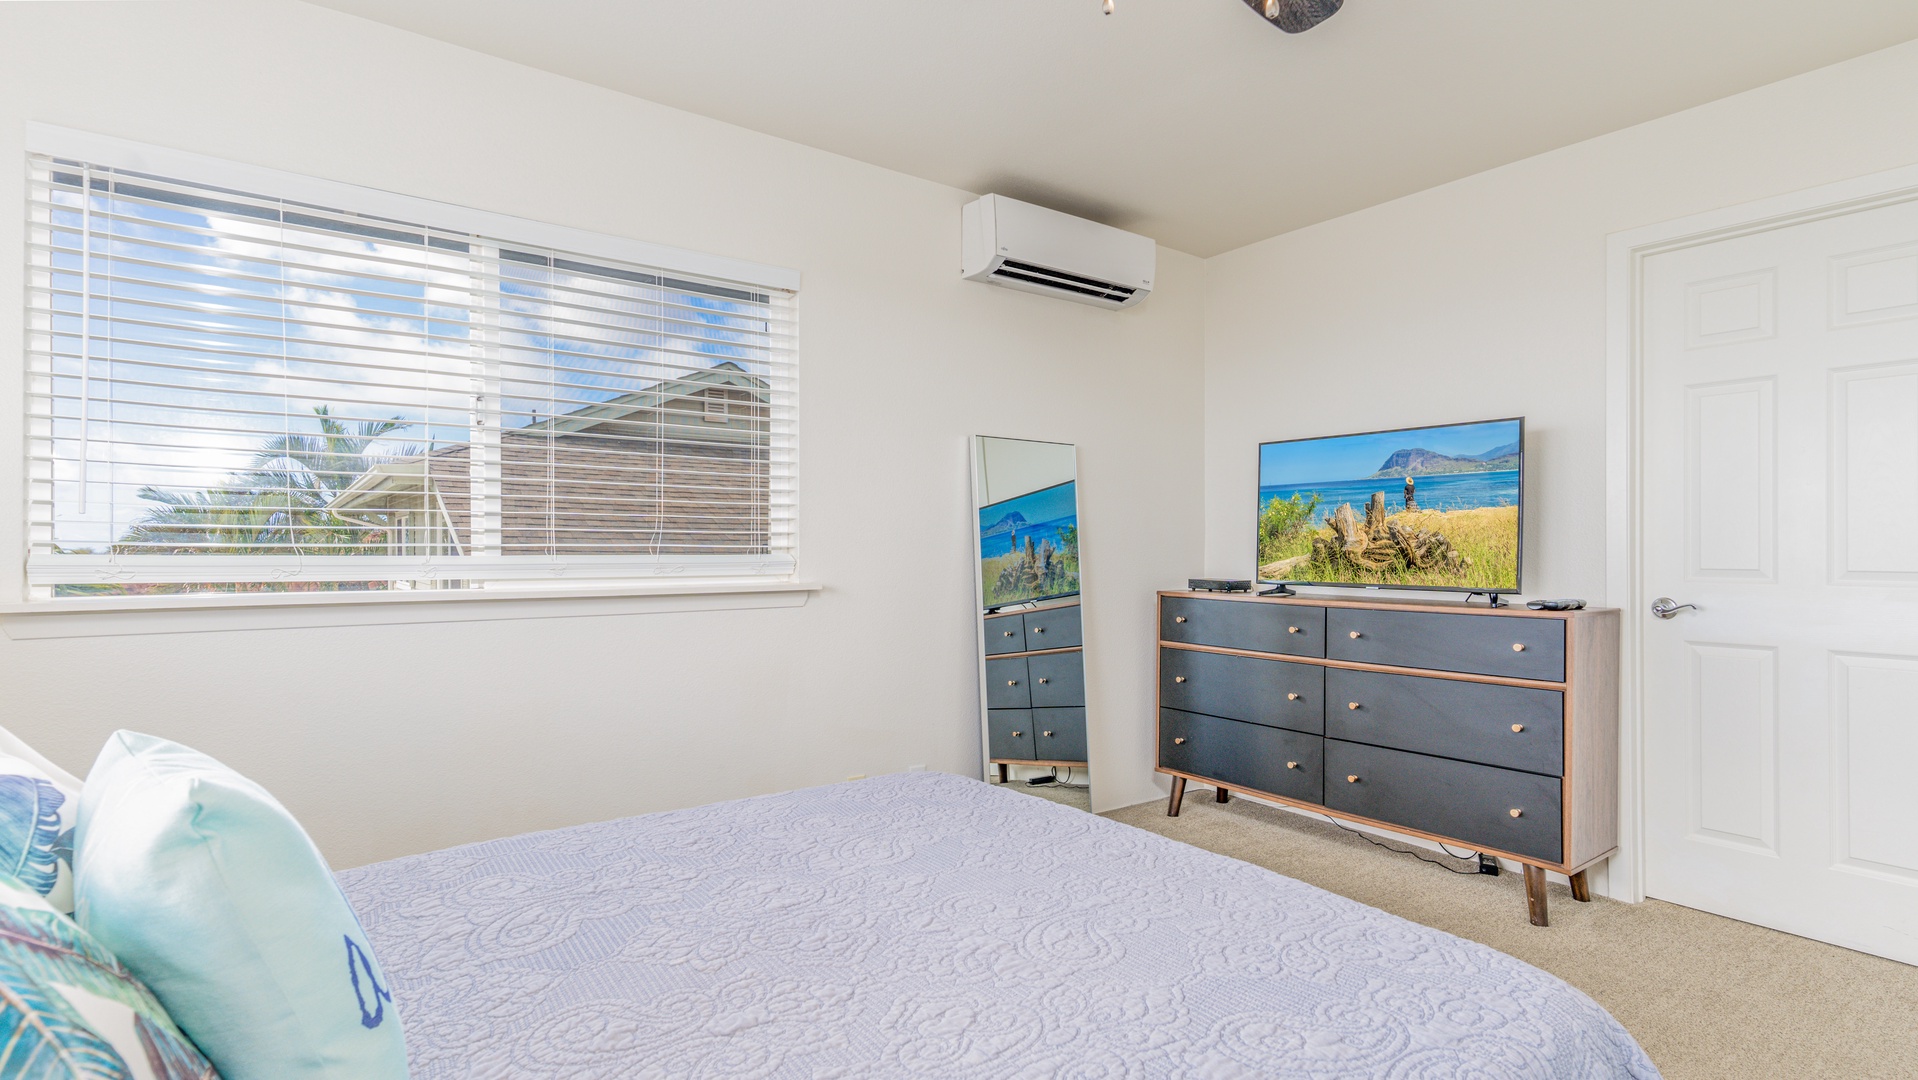 Kapolei Vacation Rentals, Makakilo Elele 48 - Complete with an AC, TV and dresser drawer.